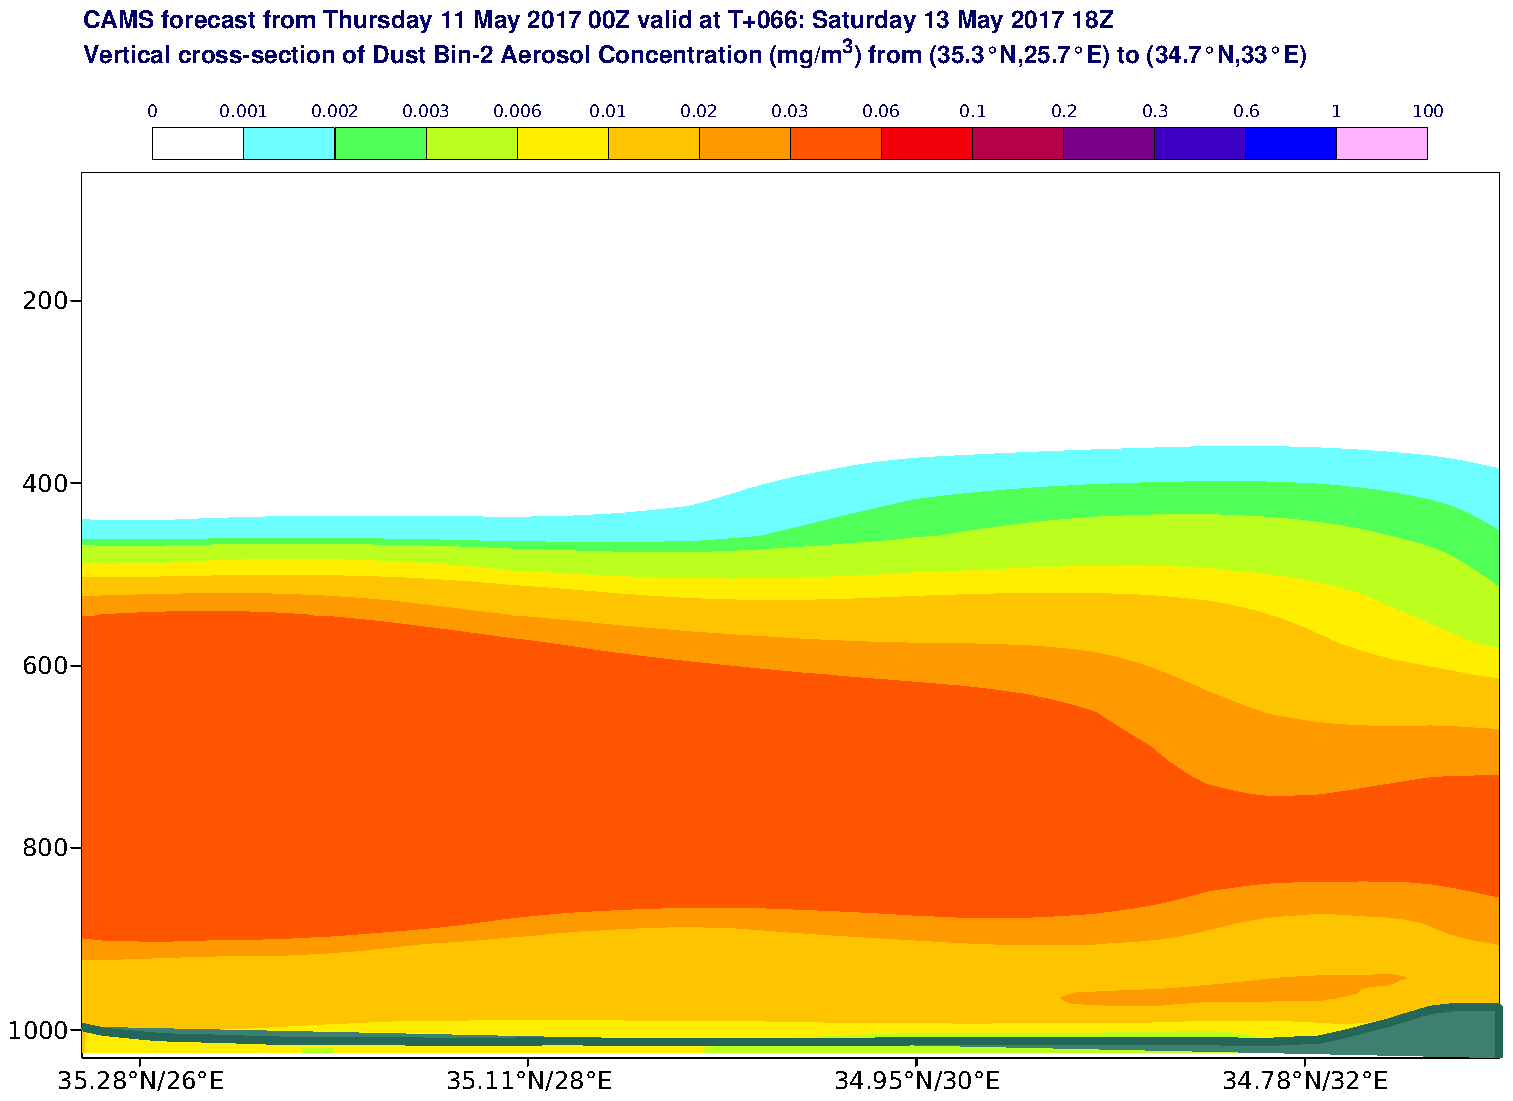 Vertical cross-section of Dust Bin-2 Aerosol Concentration (mg/m3) valid at T66 - 2017-05-13 18:00